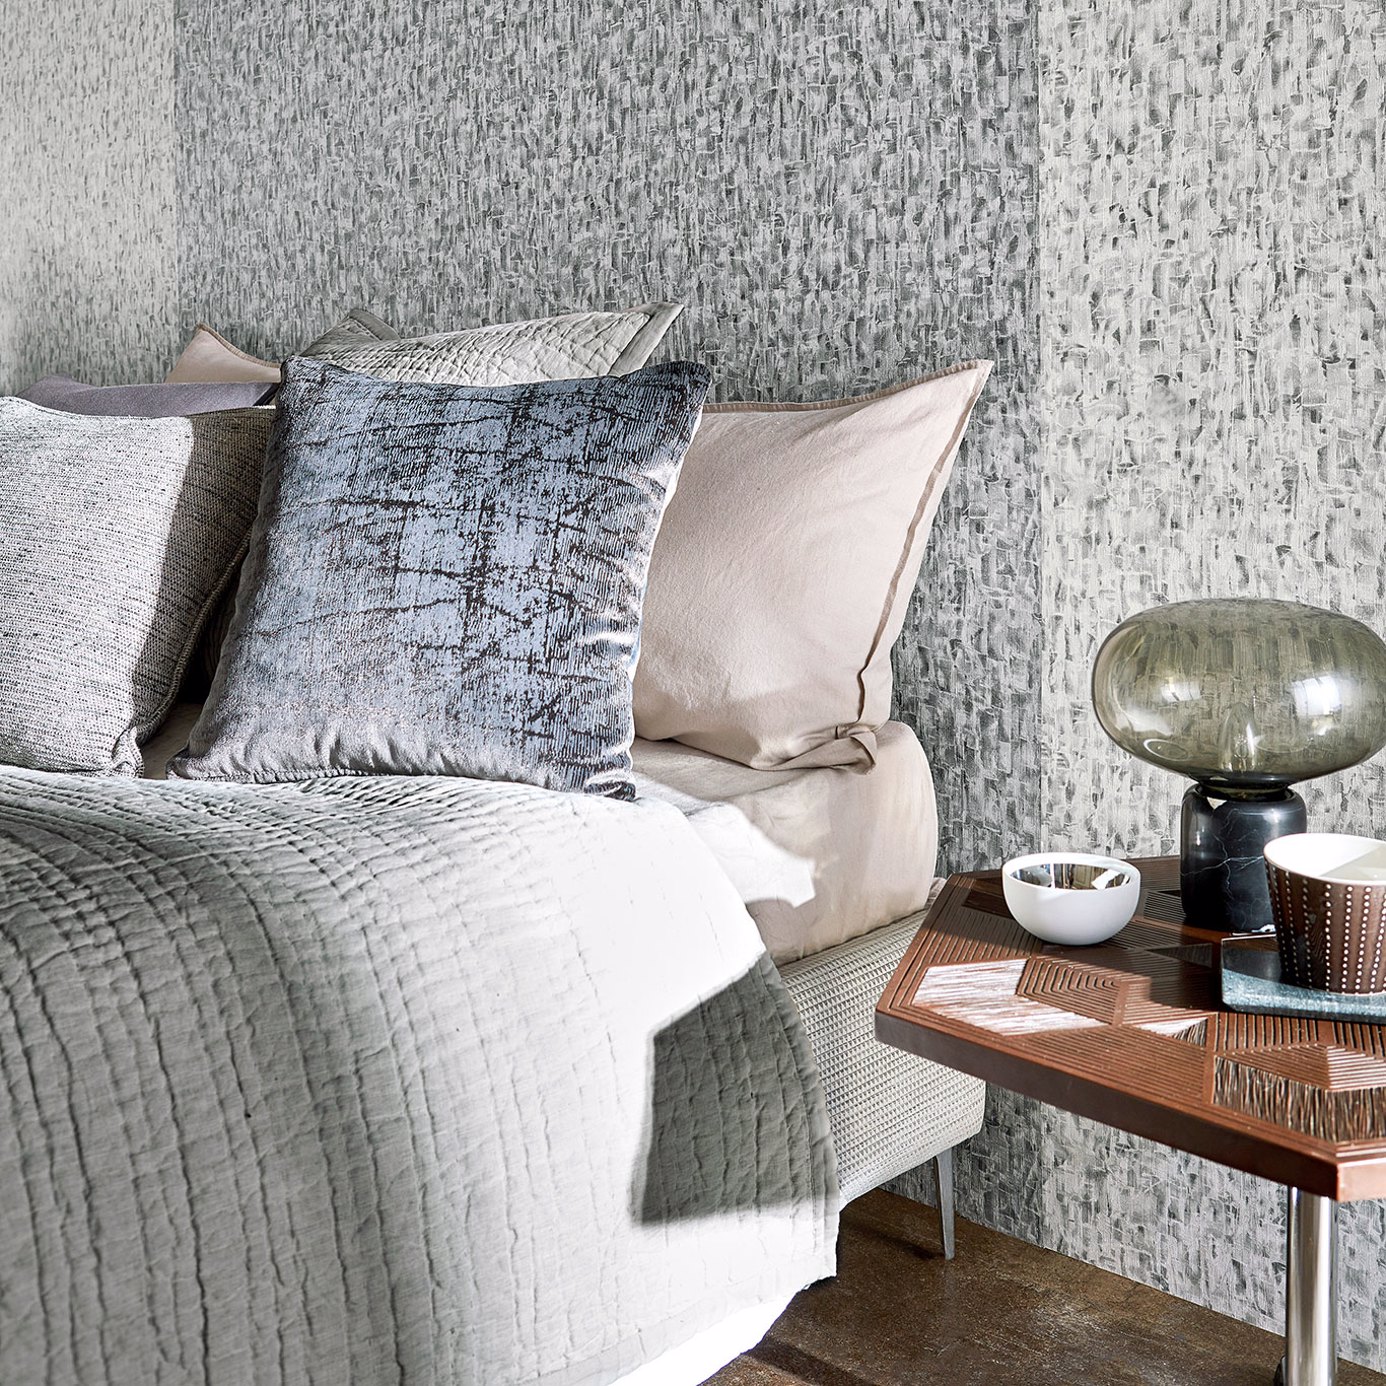 Anthology Zircon Pumice / Crystal Wallpaper by HAR